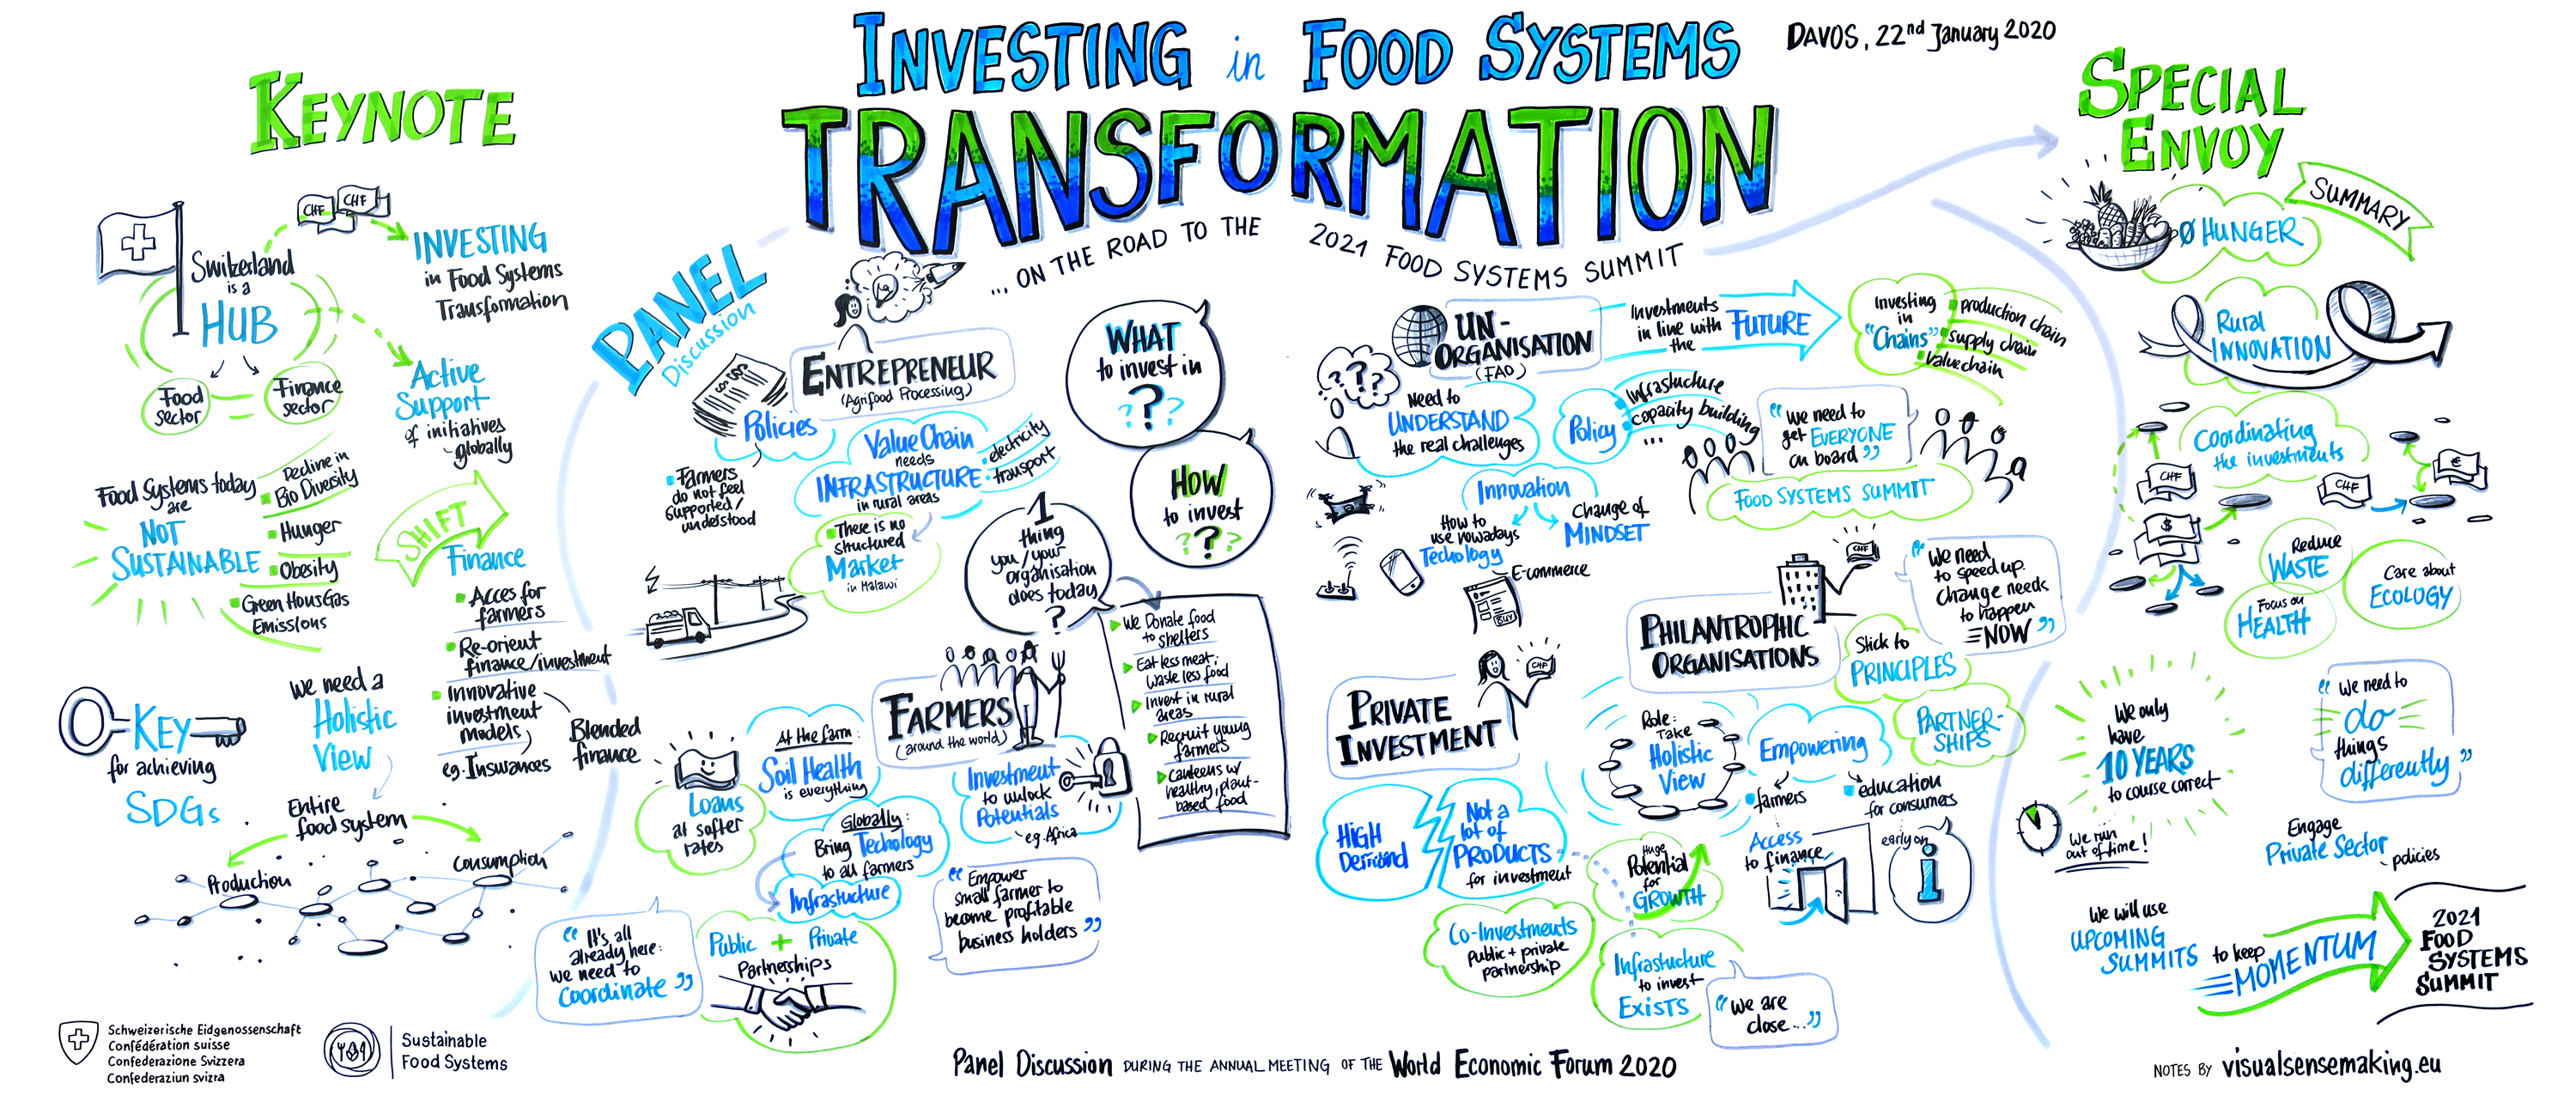 Graphic recording summarizing the Keynote & Panel Discussion of the event 'Investing in Food Systems Transformation - on the Road to the 2021 Food Systems Summit' during the World Economic Forum 2020